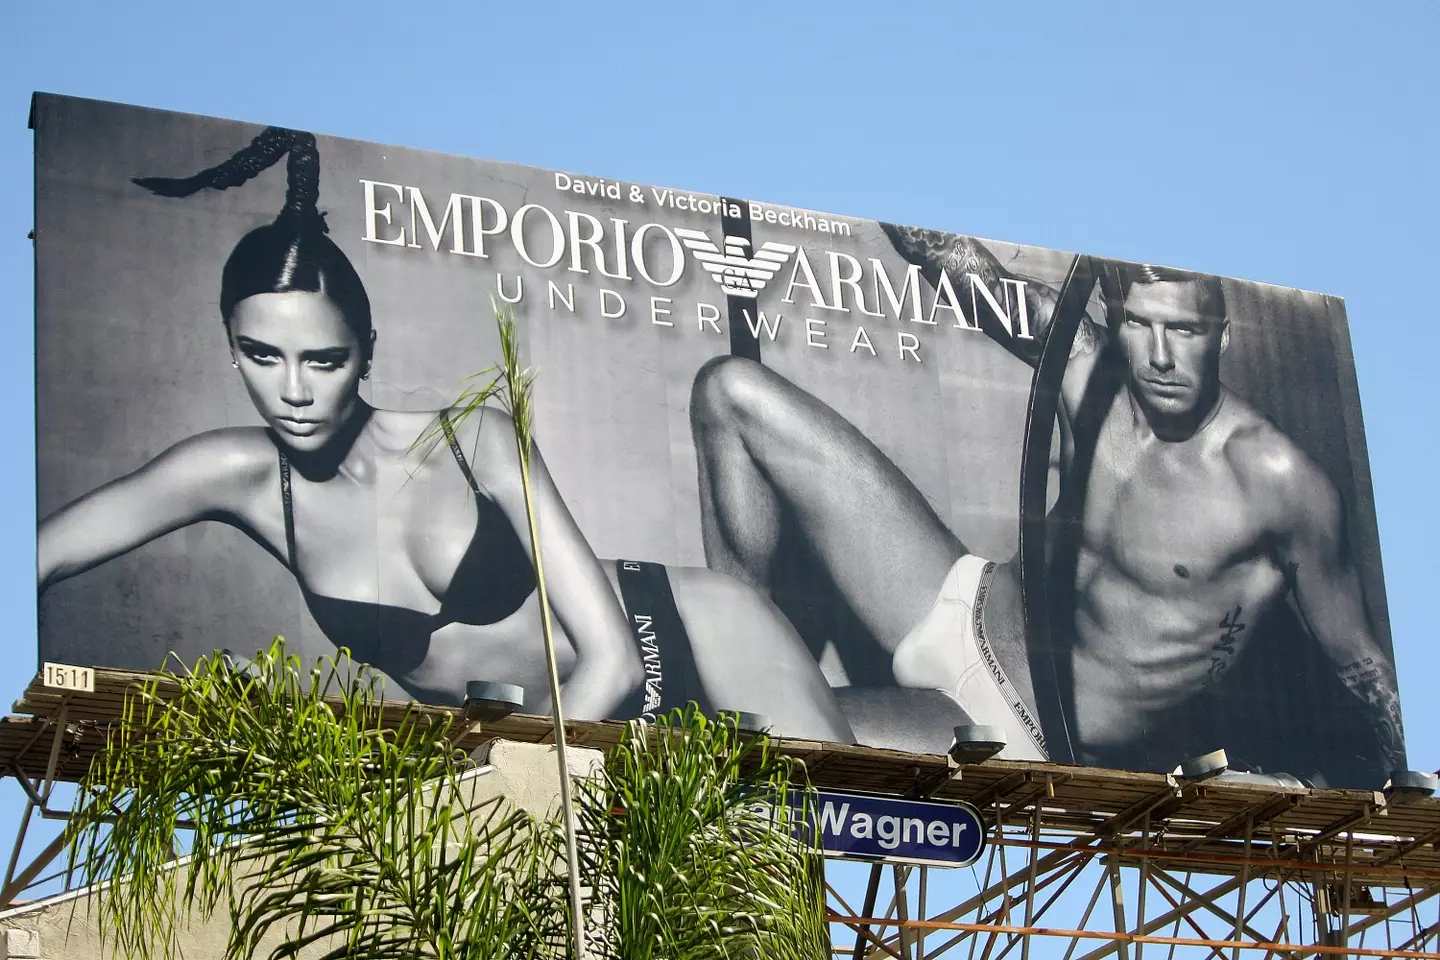 Victoria Beckham and Victoria Beckham posed together in a famous Armani underwear advert in 2007.